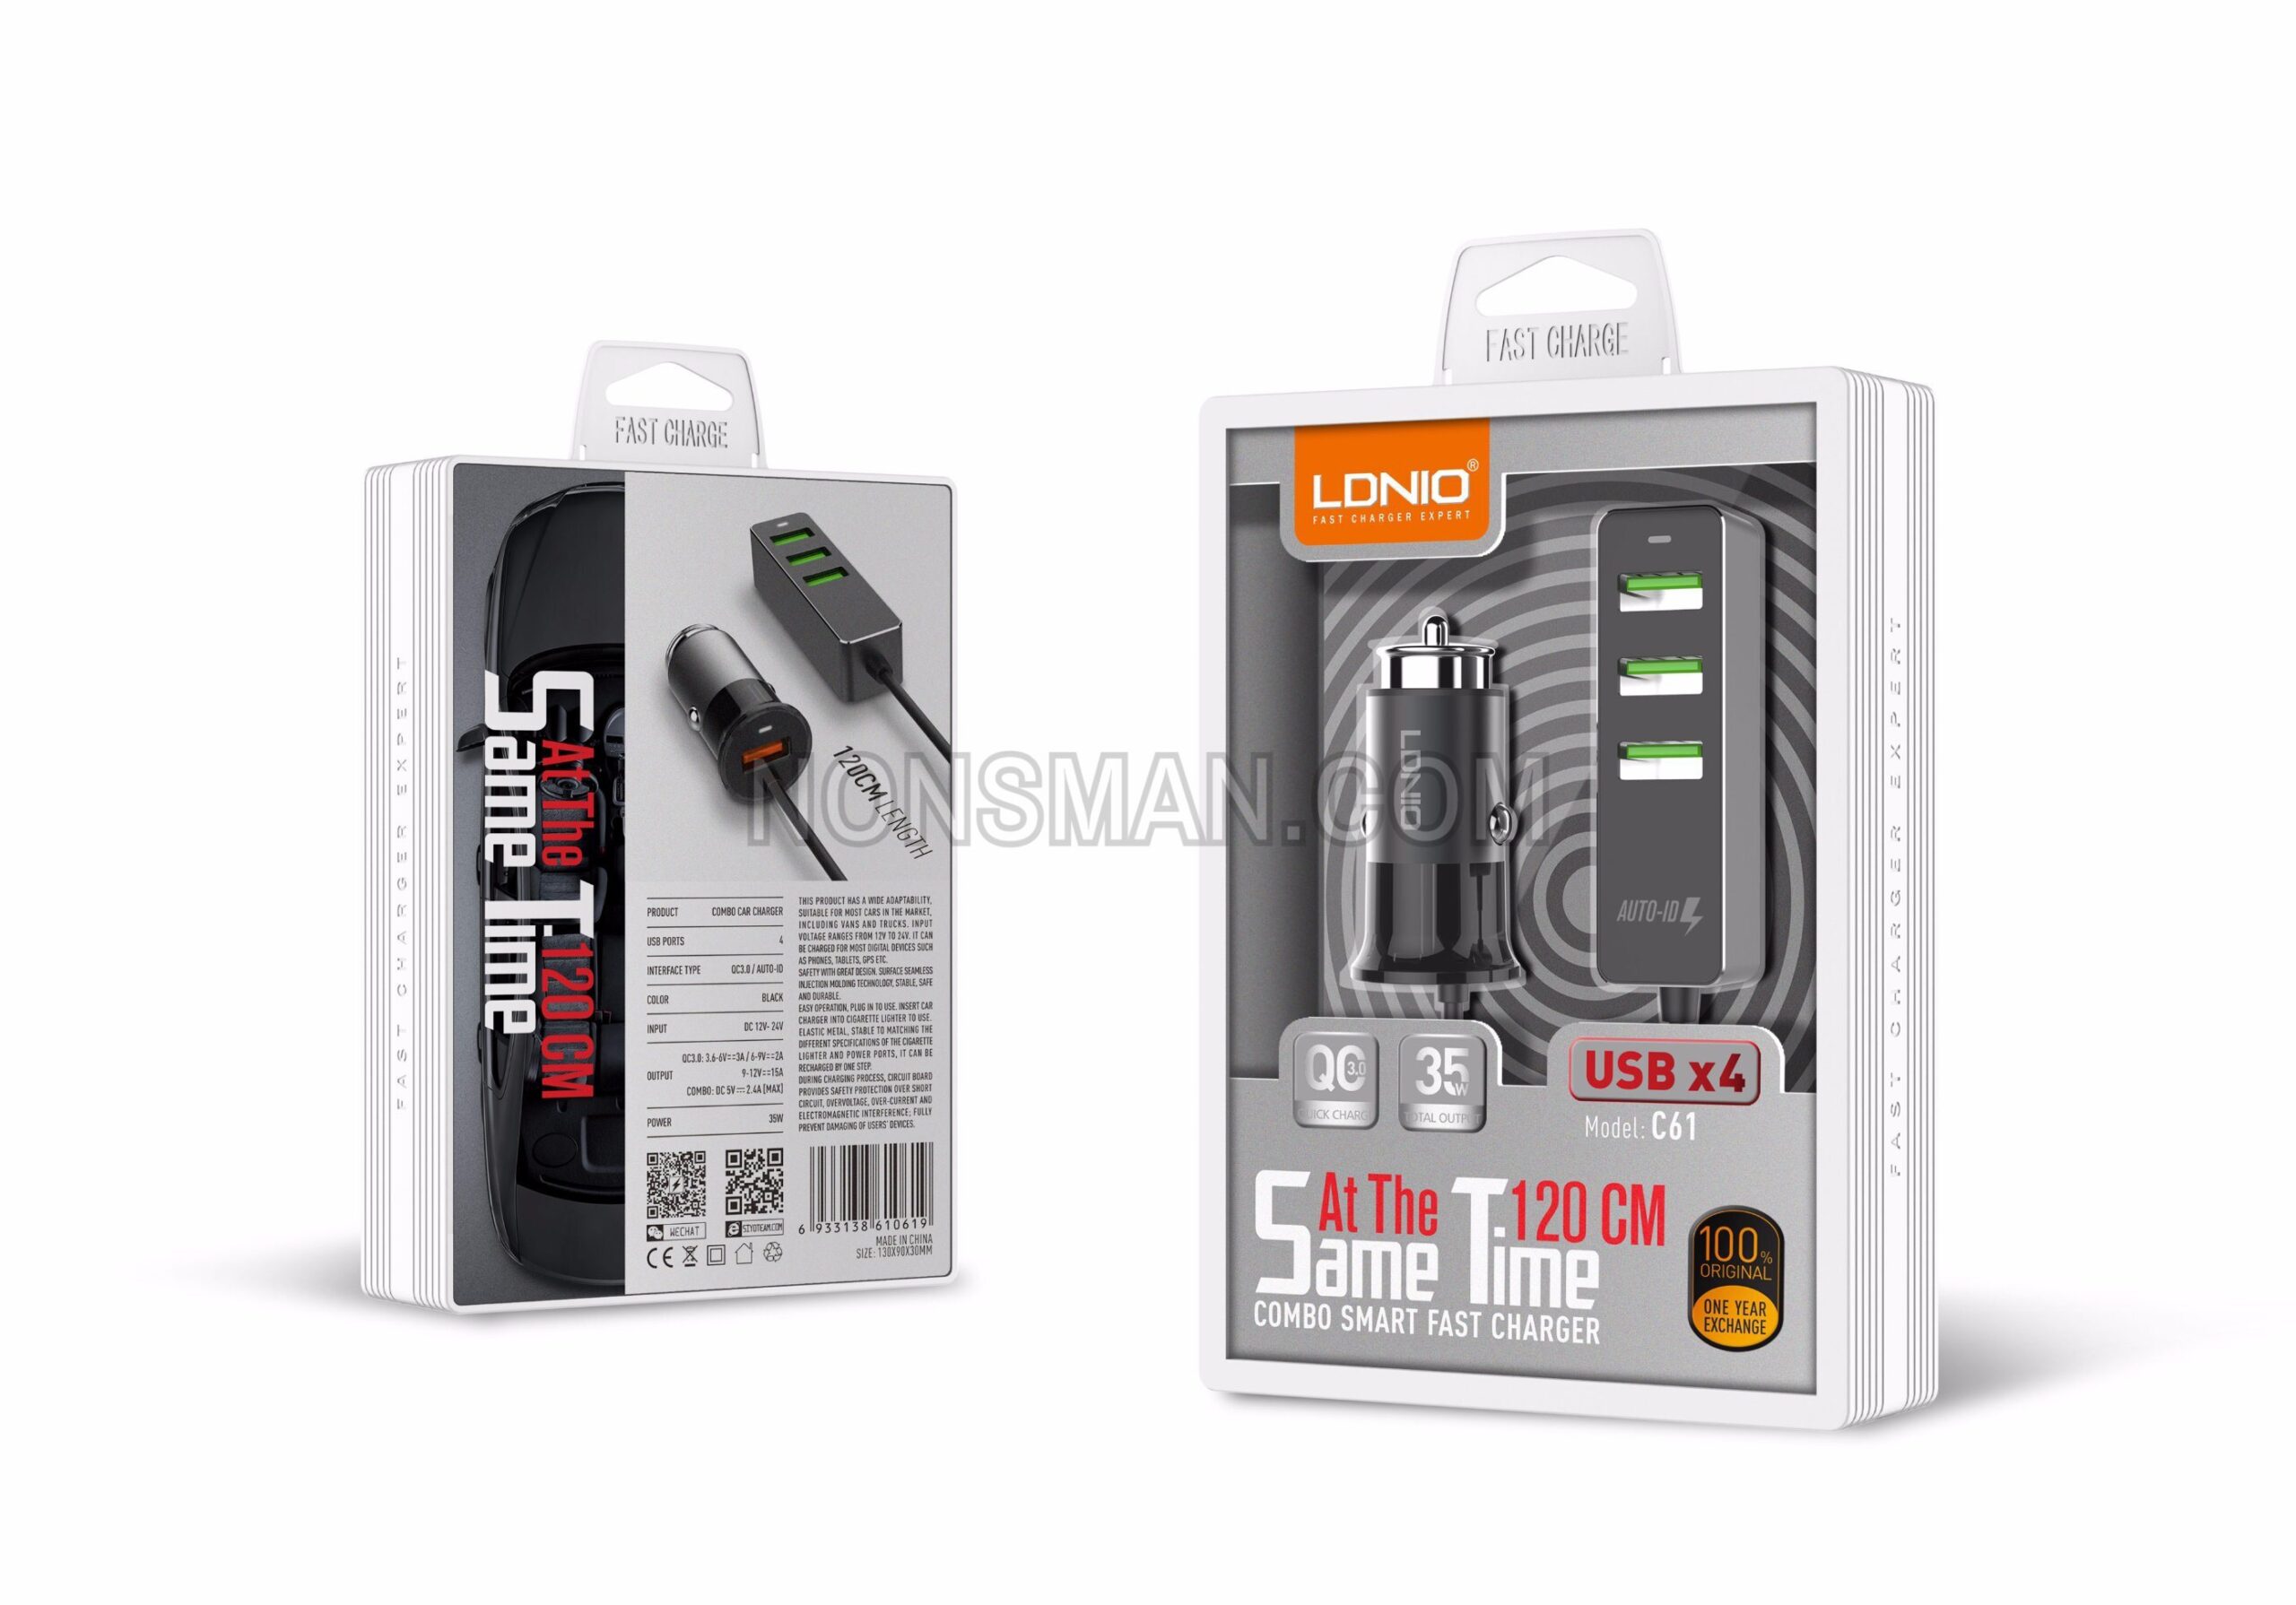 LDNIO C61 Fast Car Charger Auto-ID With 4 USB - Grey